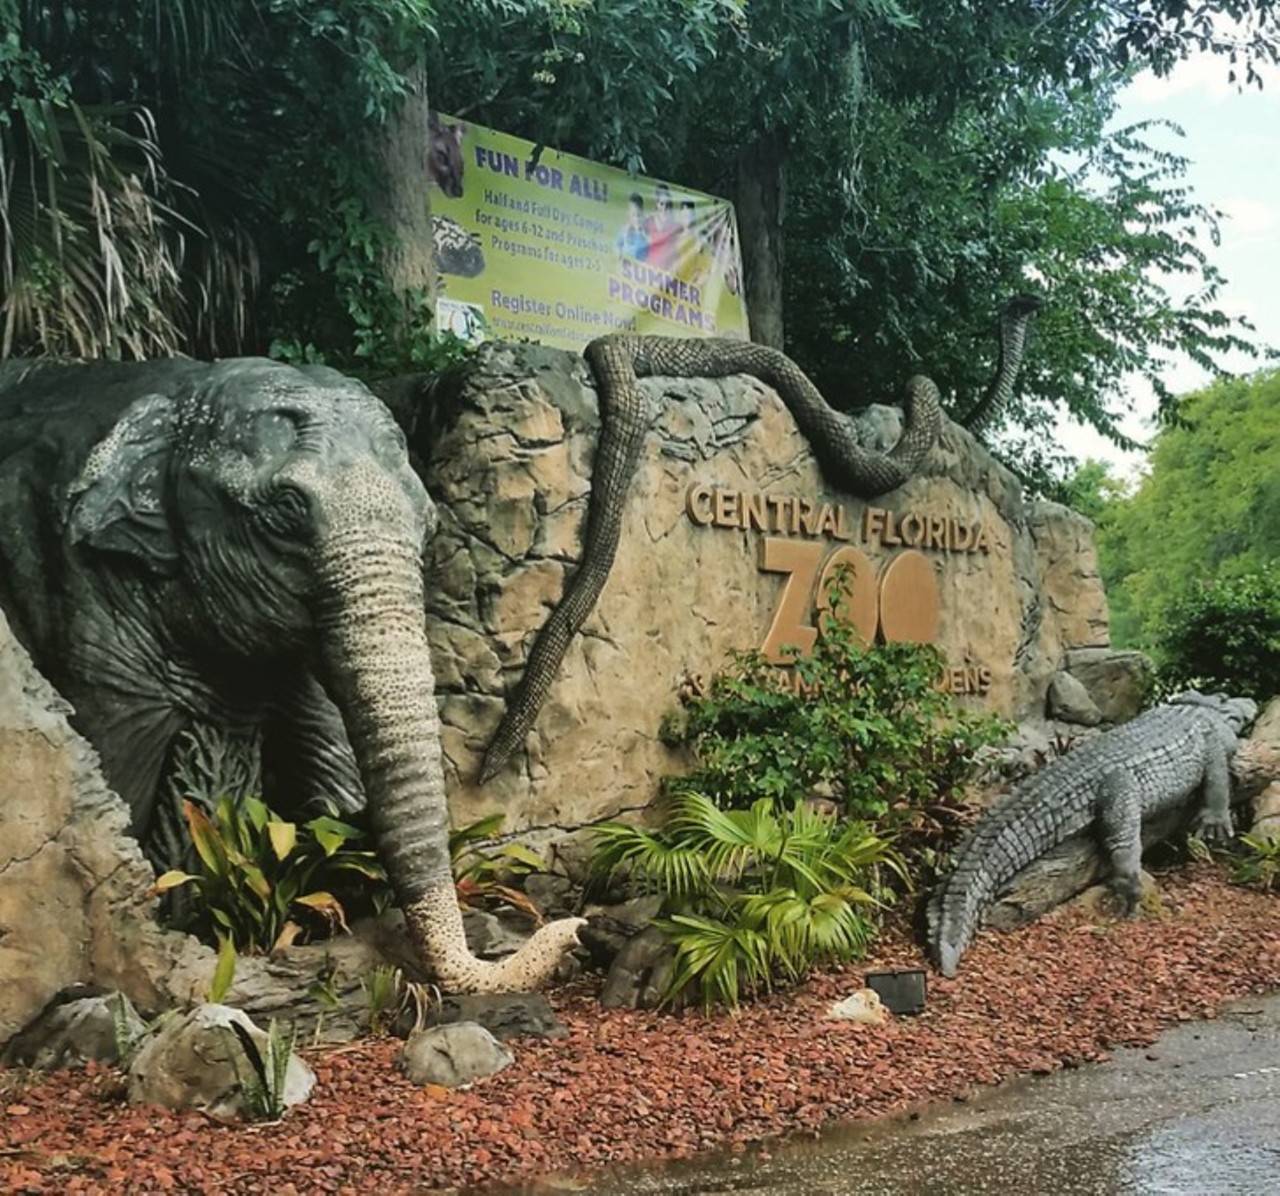 Central Florida Zoo and Botanical Gardens
3755 US-17, Sanford, FL, (407)-323-4450 
Estimated driving distance: 30 minutes
This little zoo right outside of Orlando has a variety of plants and animals to discover and is a great way to spend a some time outside the city for the day.
Photo via findaj/Instagram